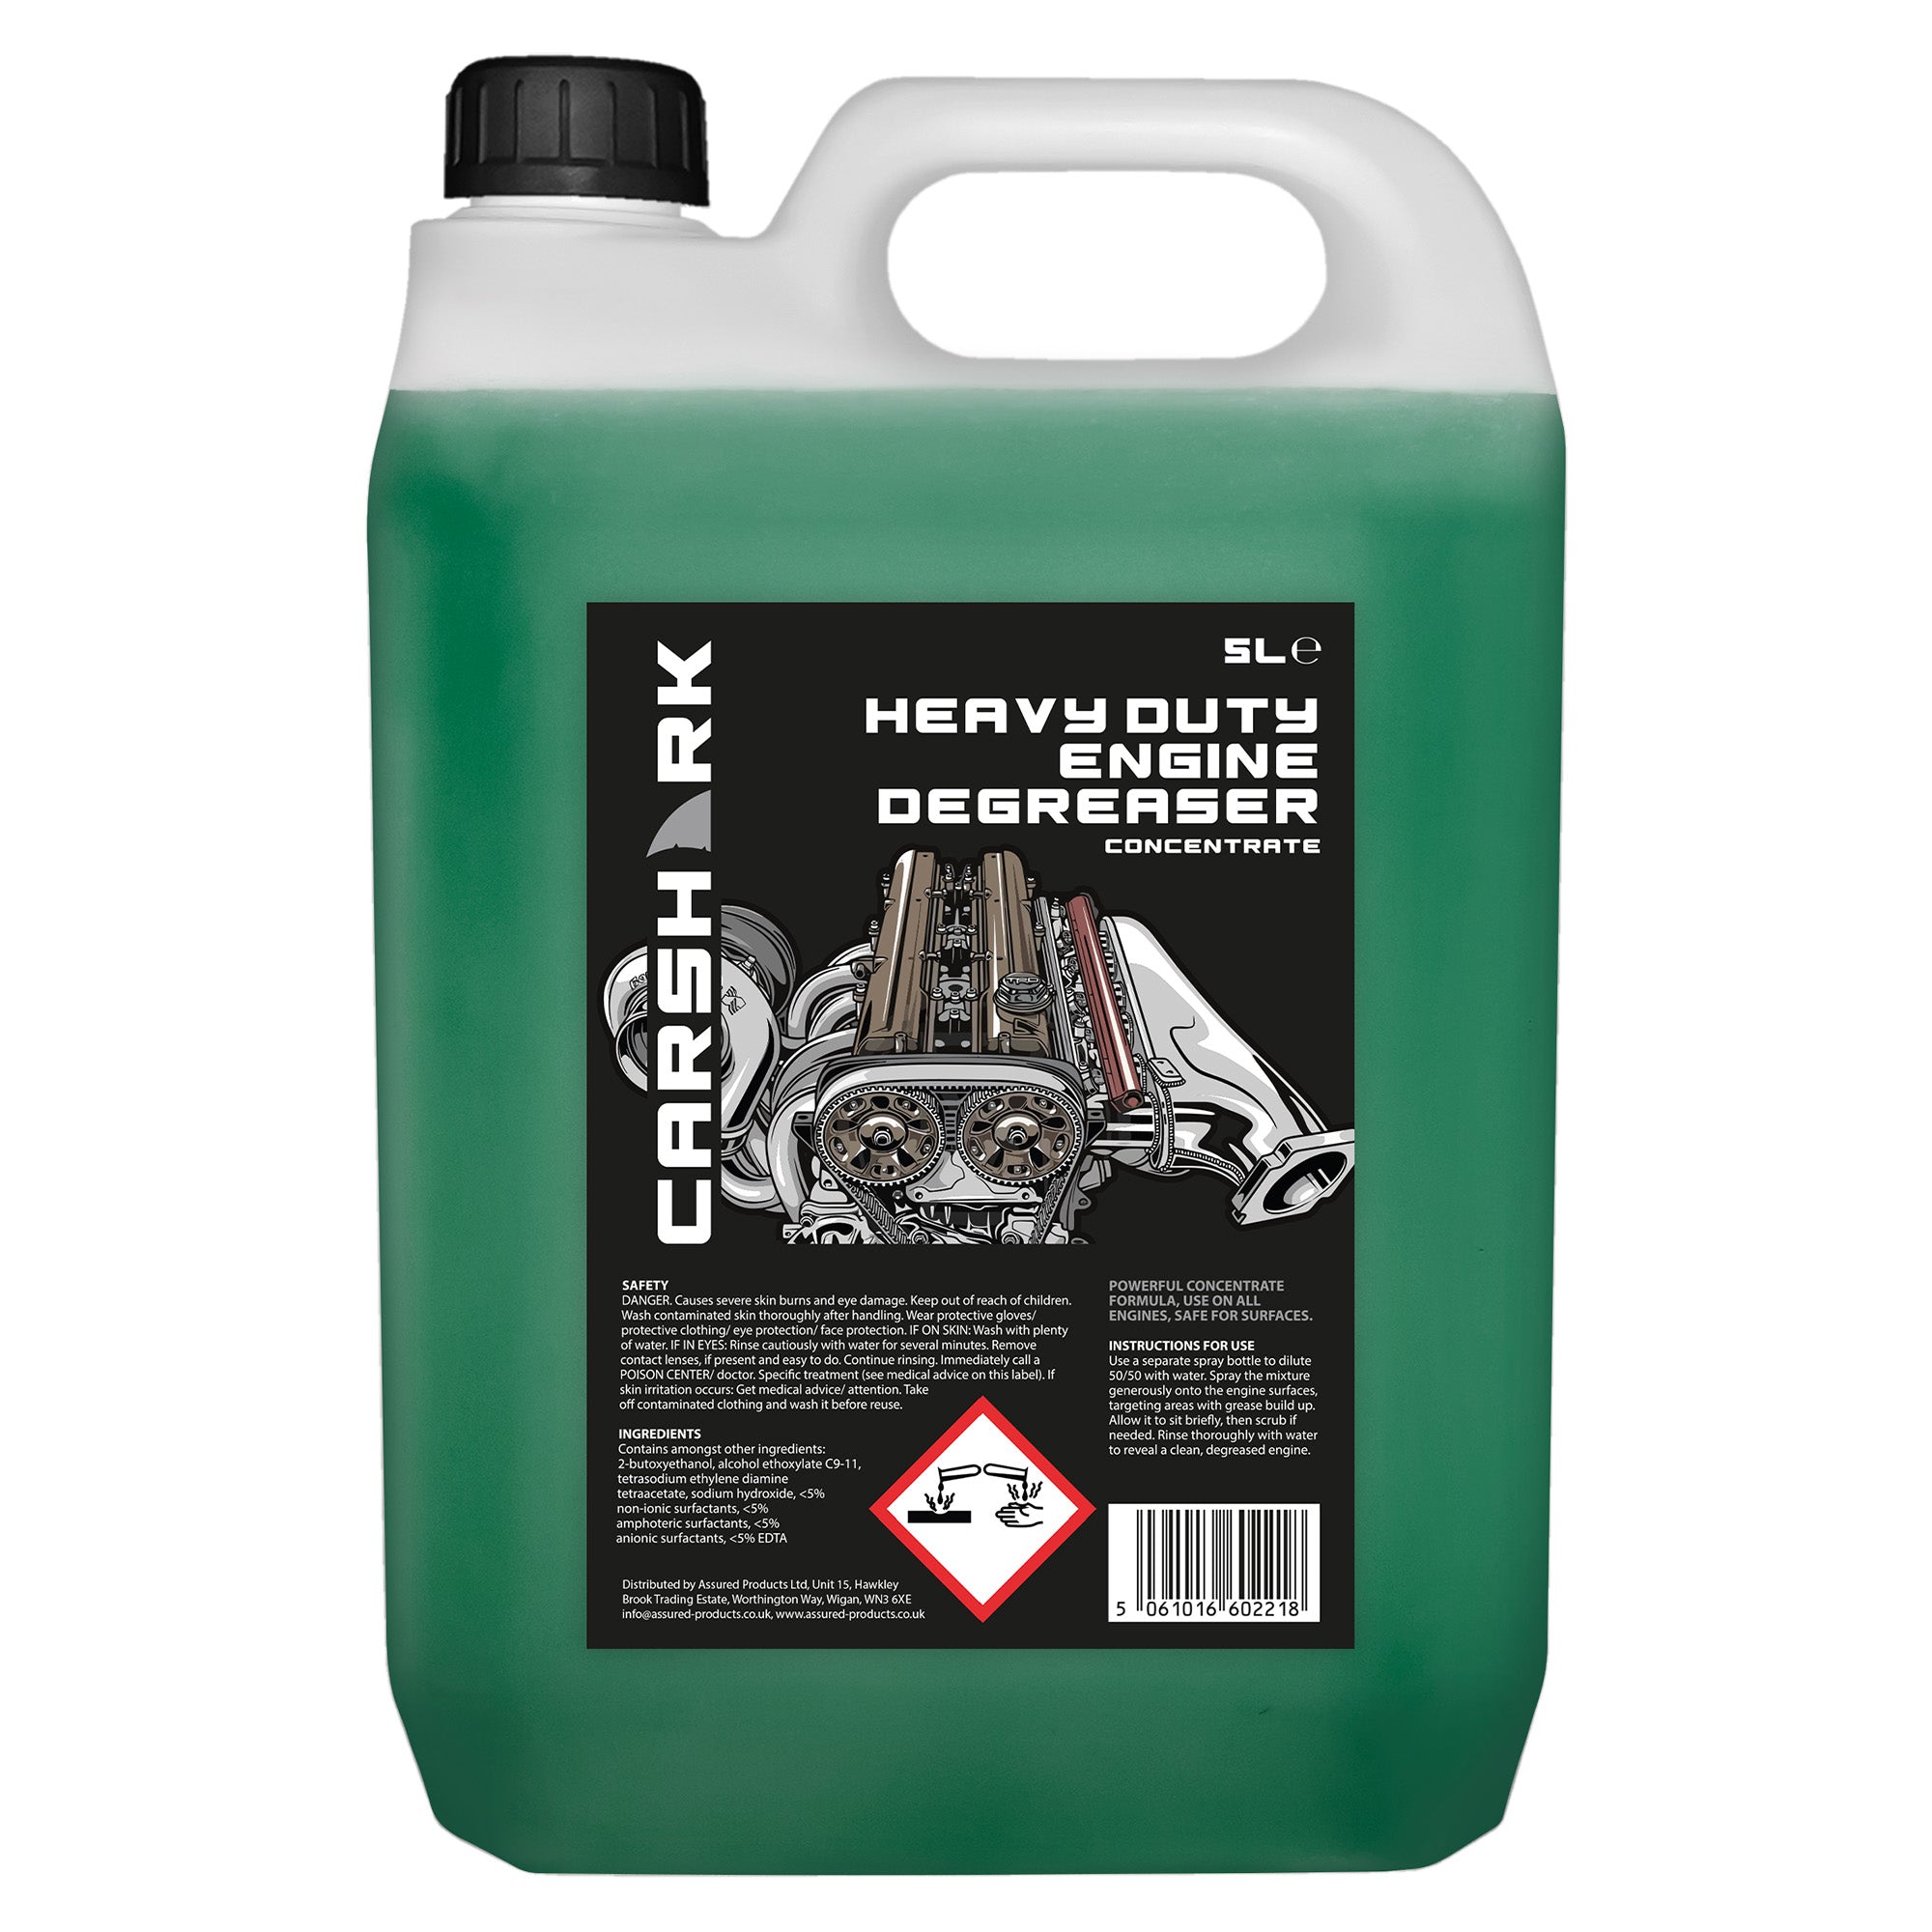 CARSHARK Engine Degreaser - 5L - Heavy Duty Concentrate